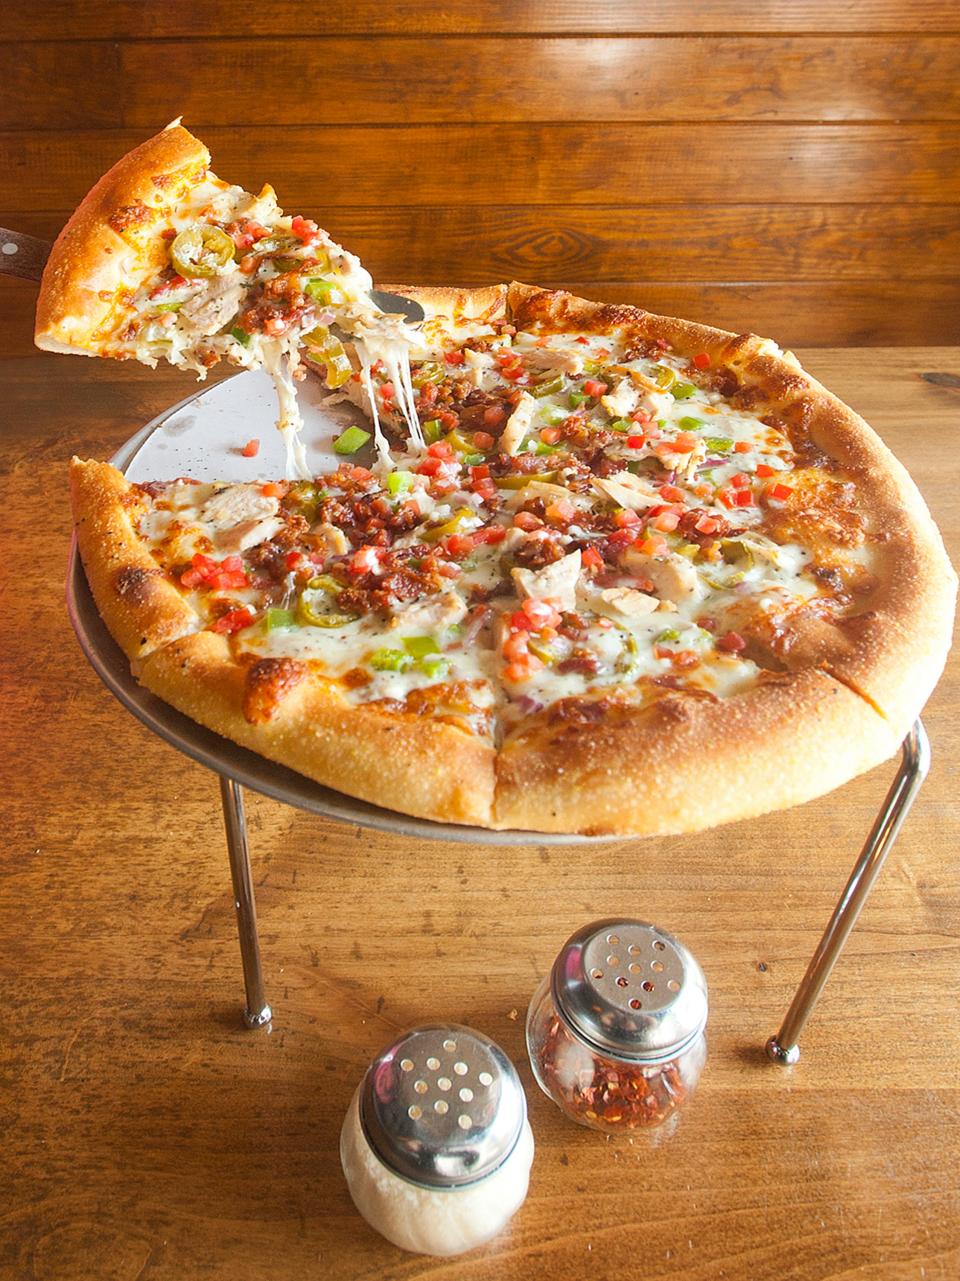 The Parlour's DR. pizza is the eatery's version of the classic chicken, bacon and ranch dressing. July 18, 2019